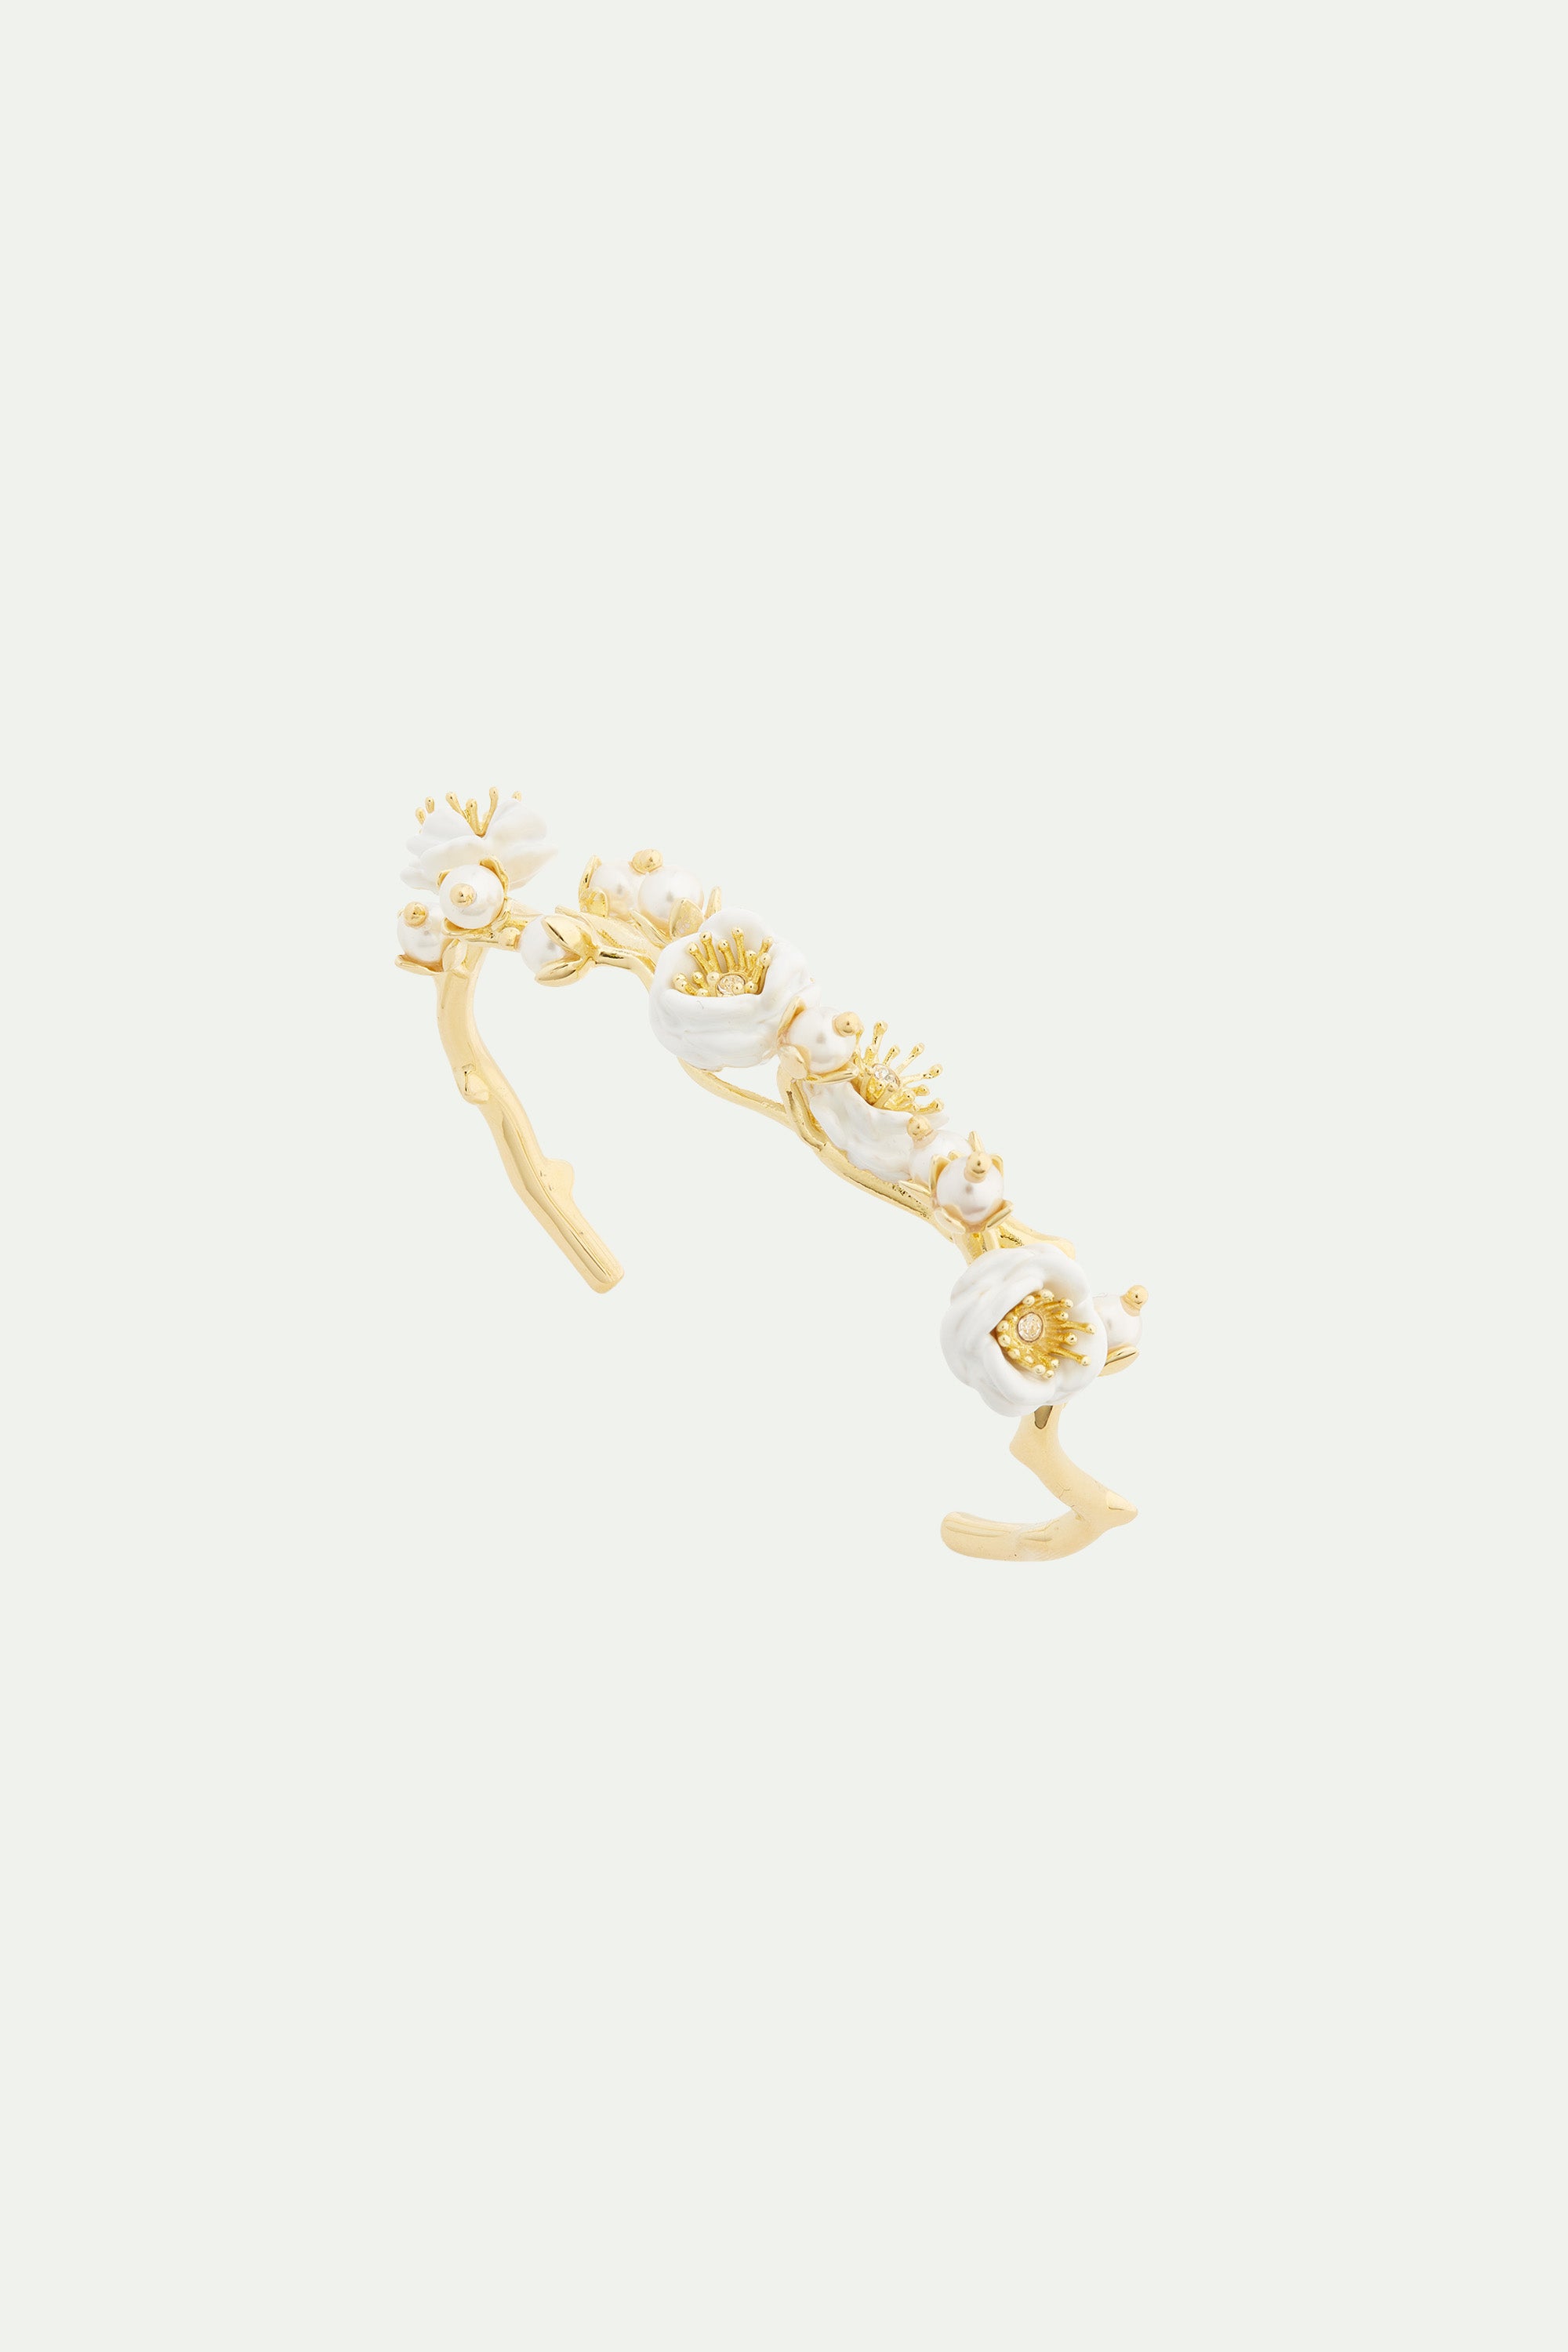 White rose branch and pearls bangle bracelet